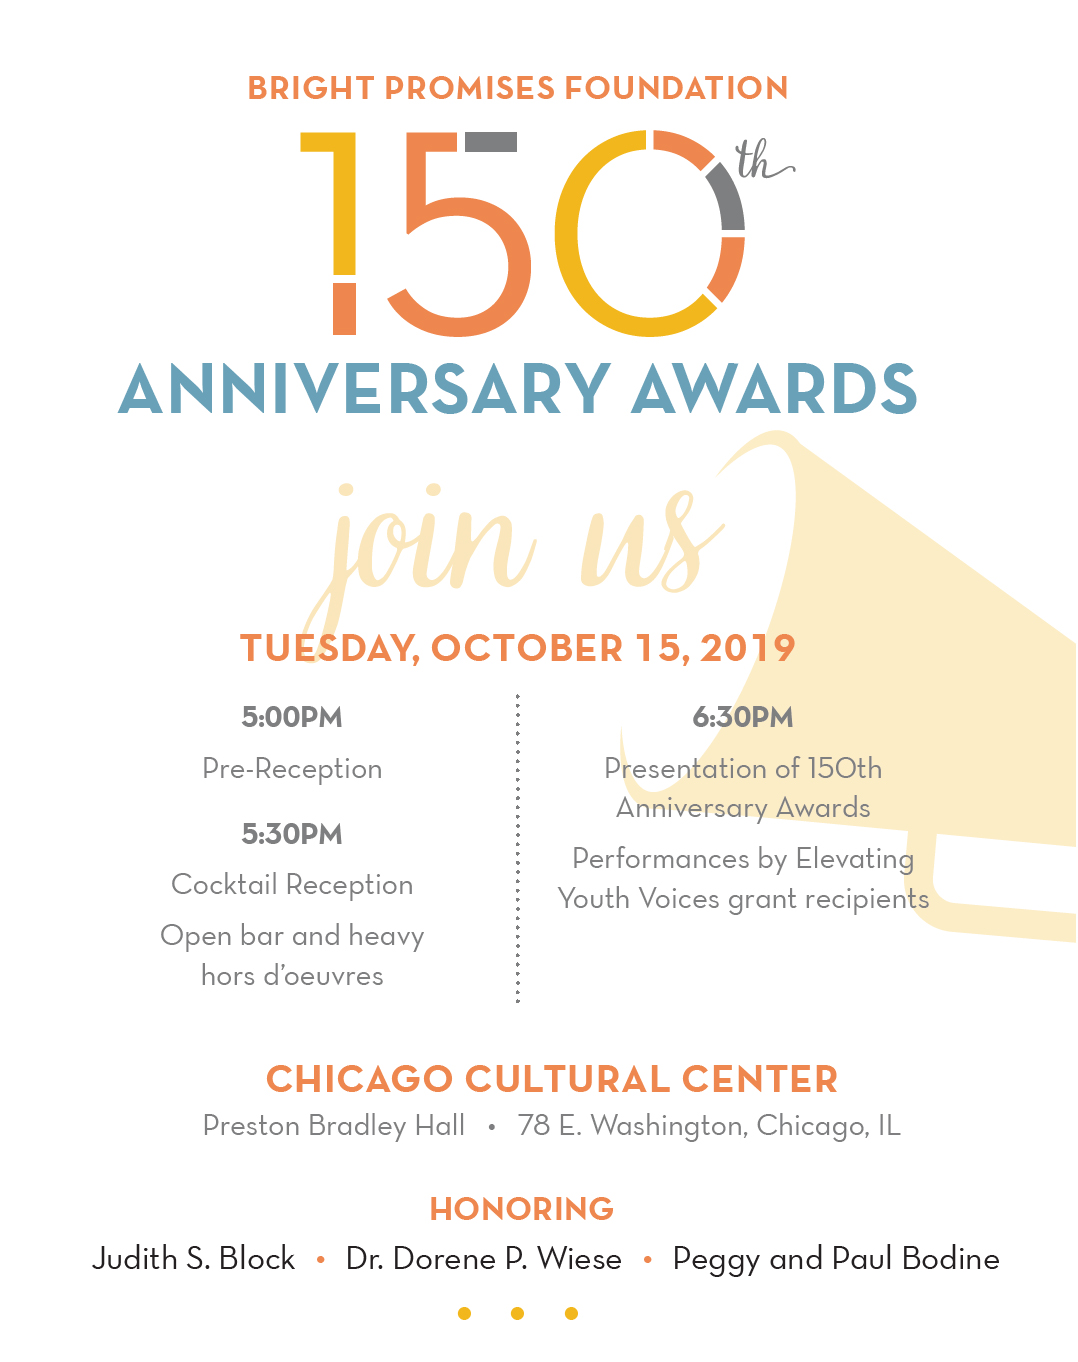 Bright Promises Foundation's 150th Anniversary Awards